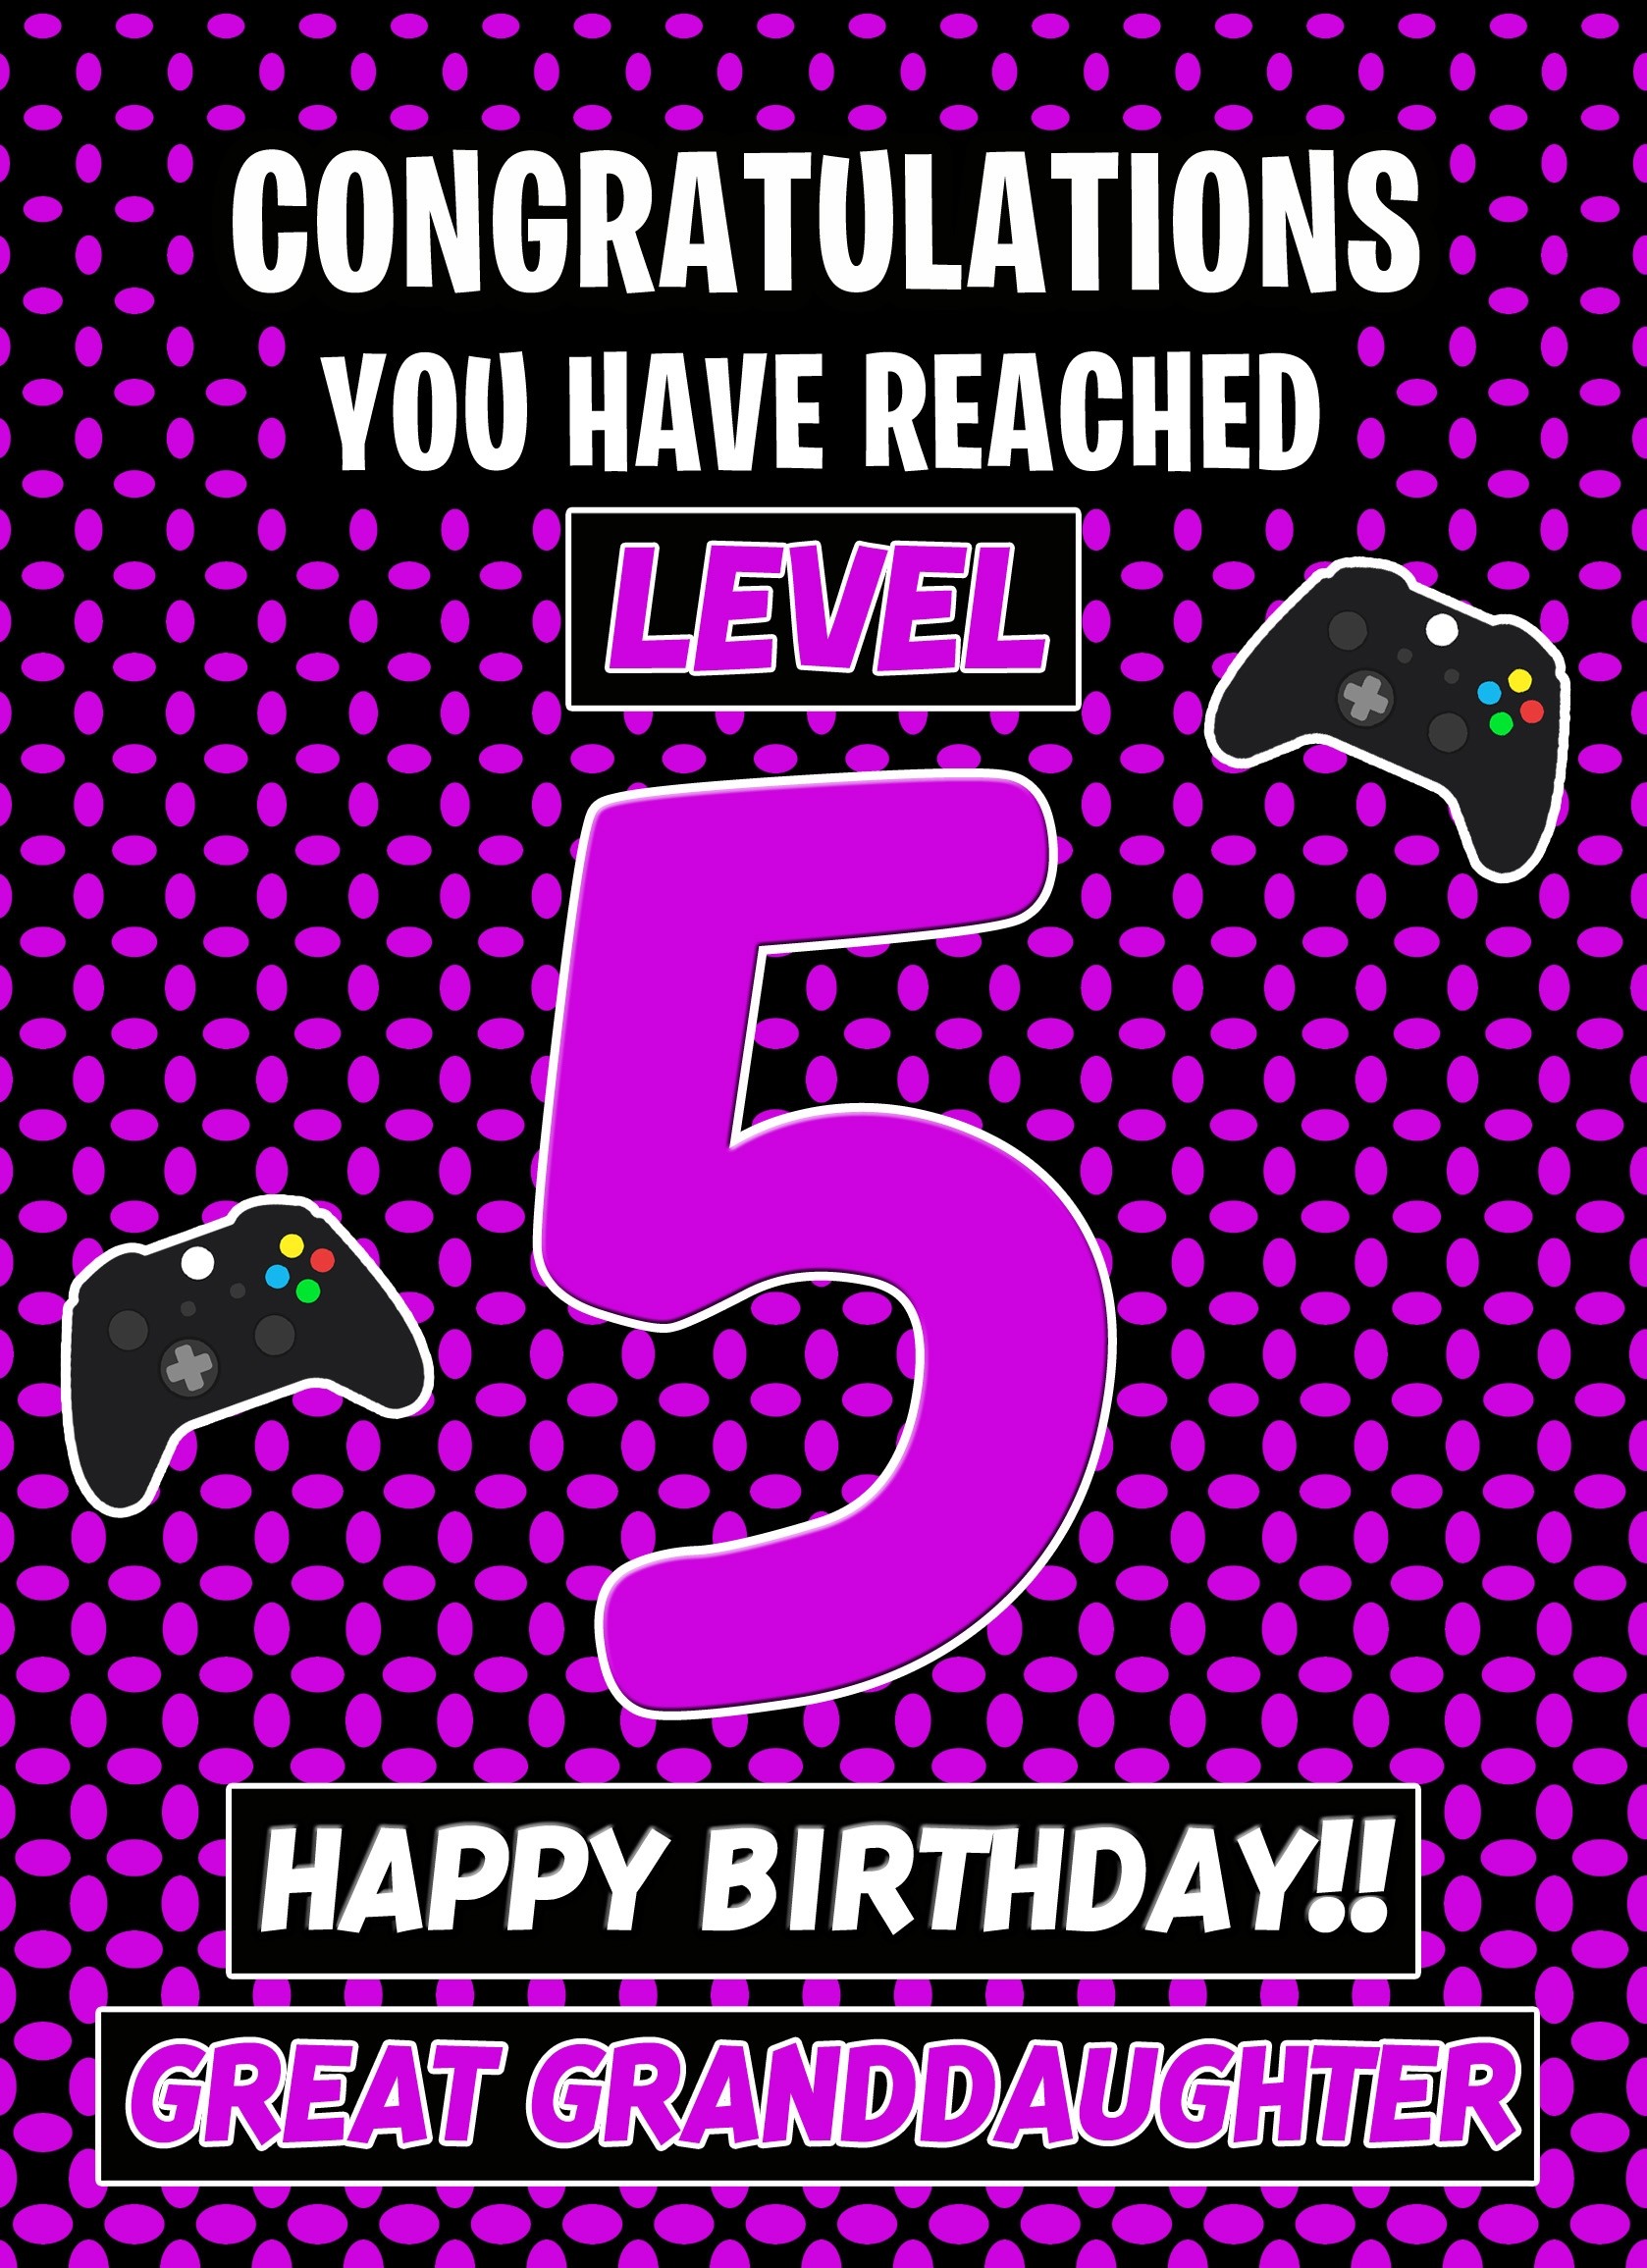 Great Granddaughter 5th Birthday Card (Level Up Gamer)